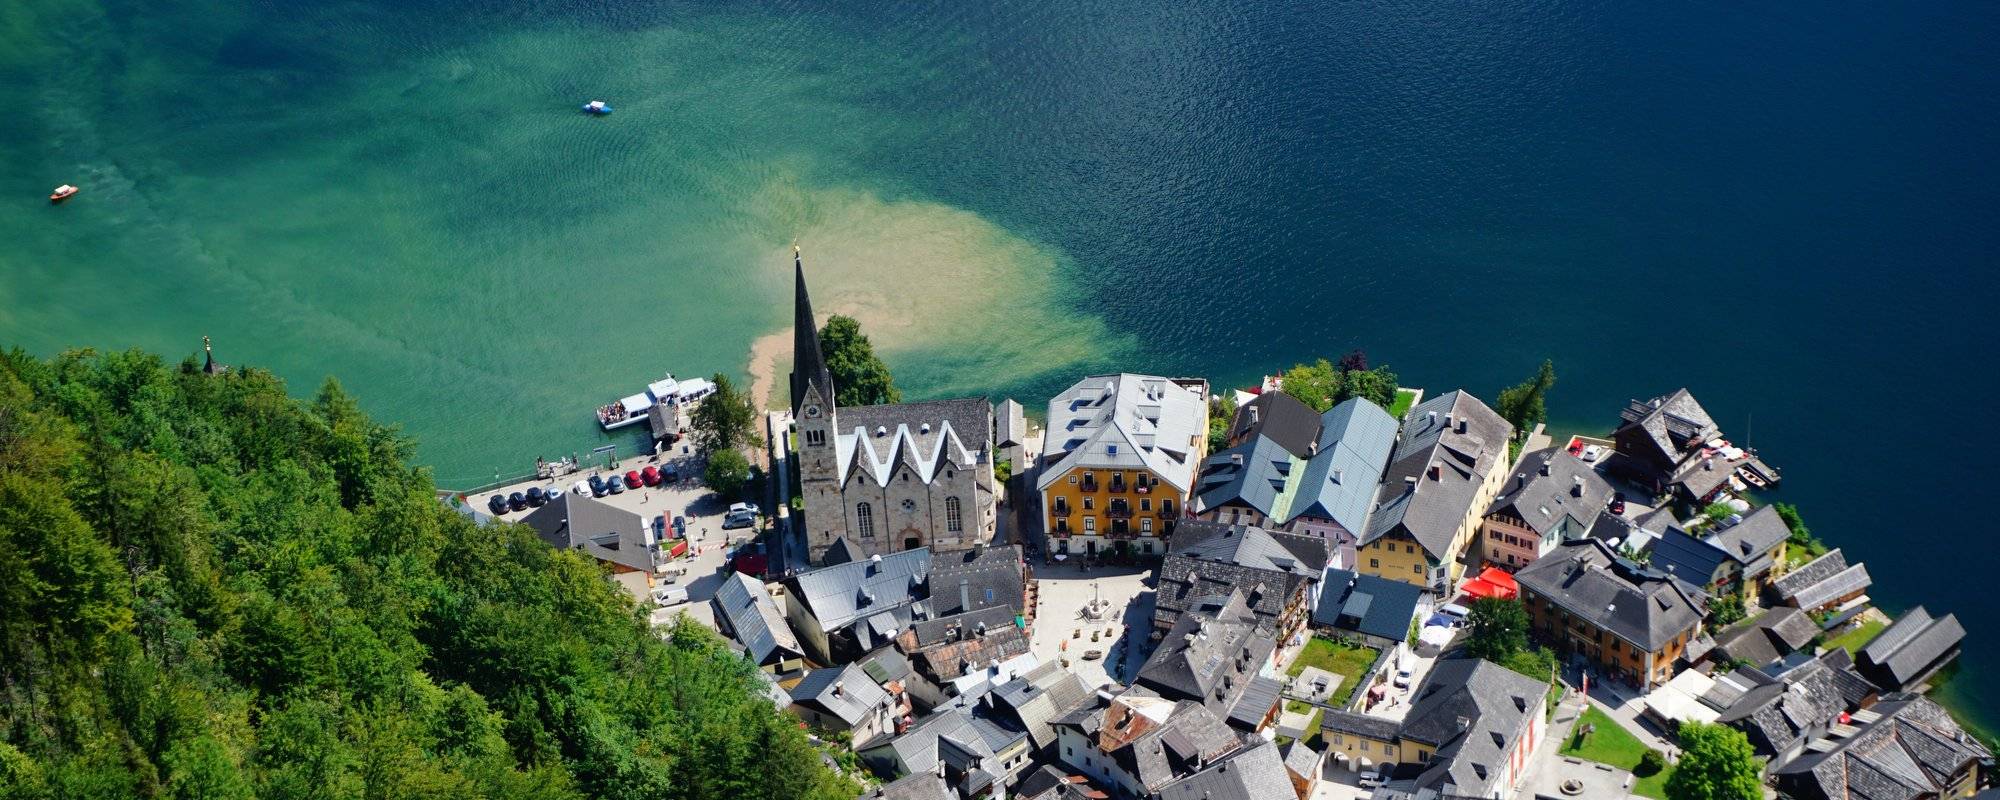 Visiting Hallstatt - beautiful tiny town on UNESCO herritage list with the oldest saltmine in the world!